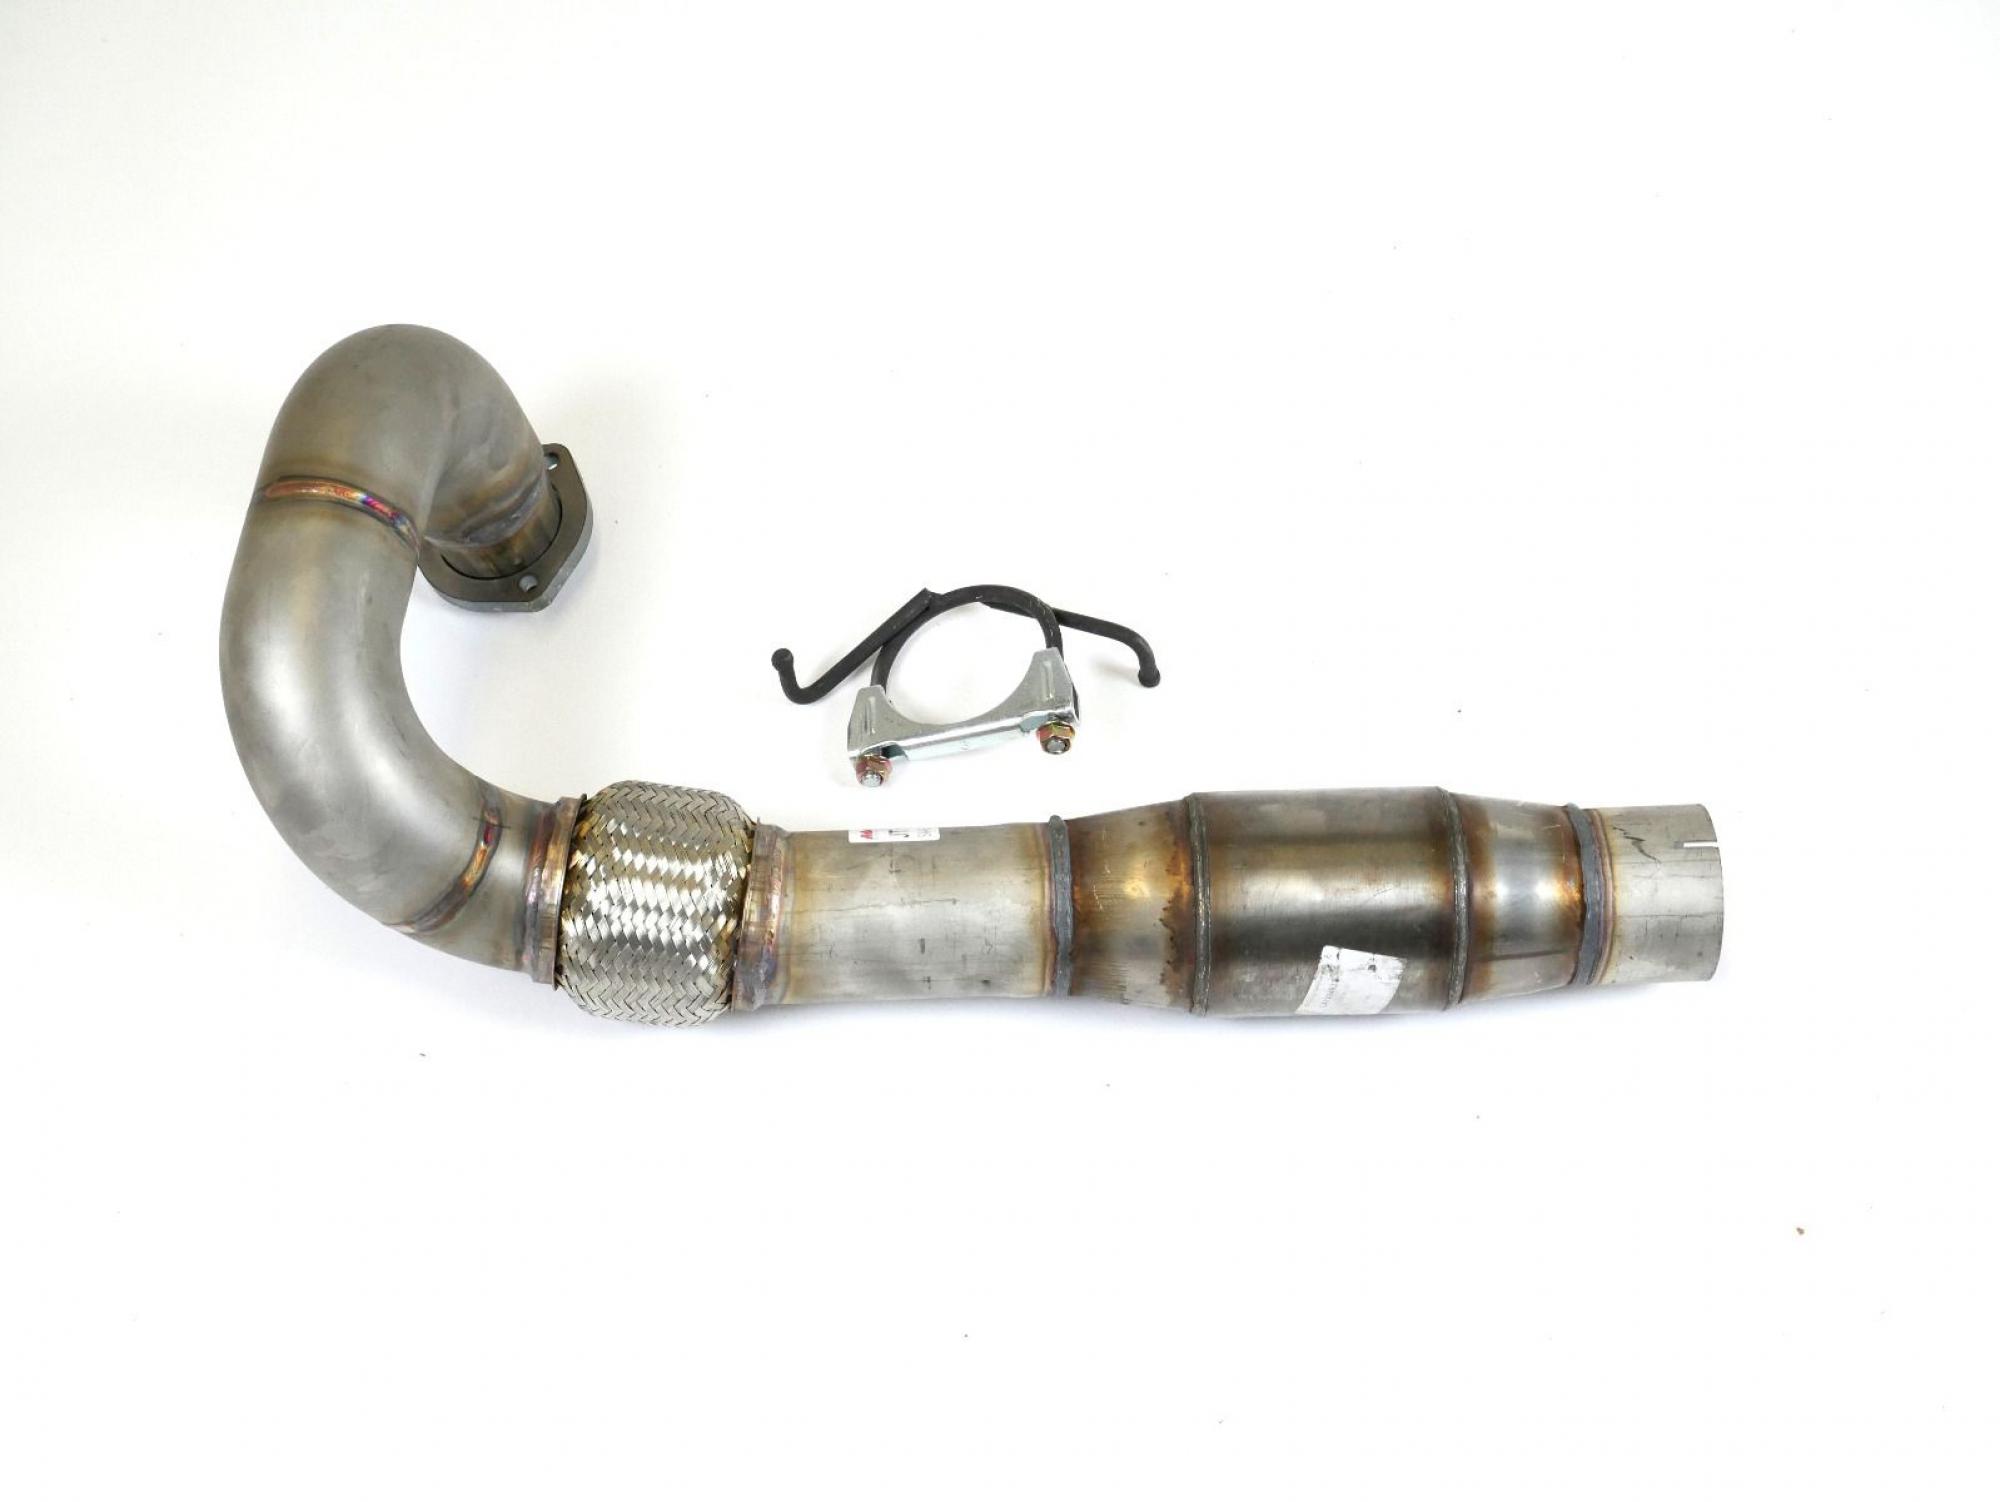 JT 76mm Sport Downpipe with 200CPSI Catalytic Converter SAAB 900 9-3 1994-2002